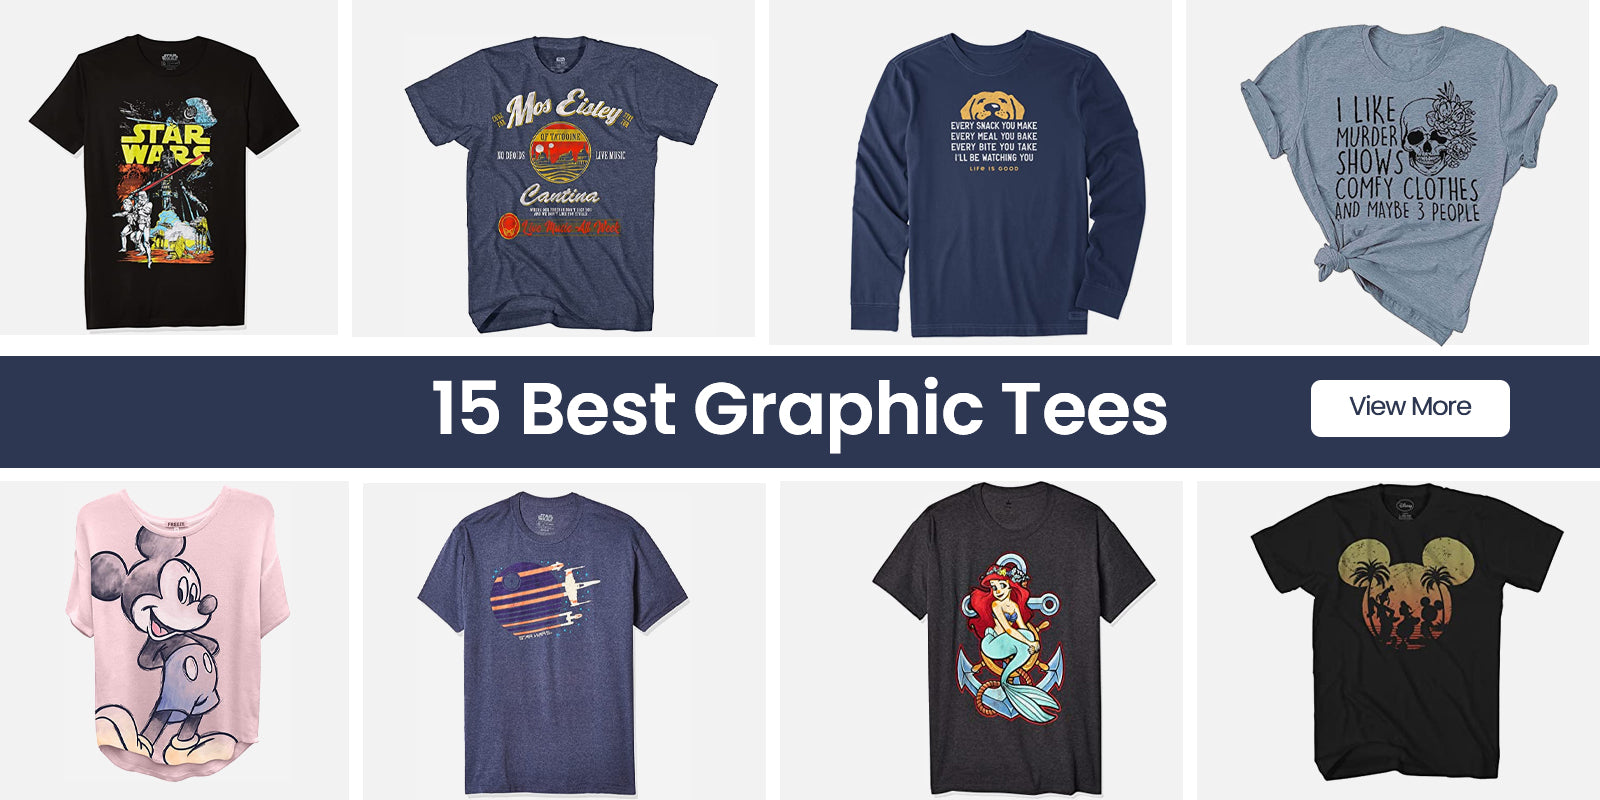 Check out these best brands to get vintage graphic tees